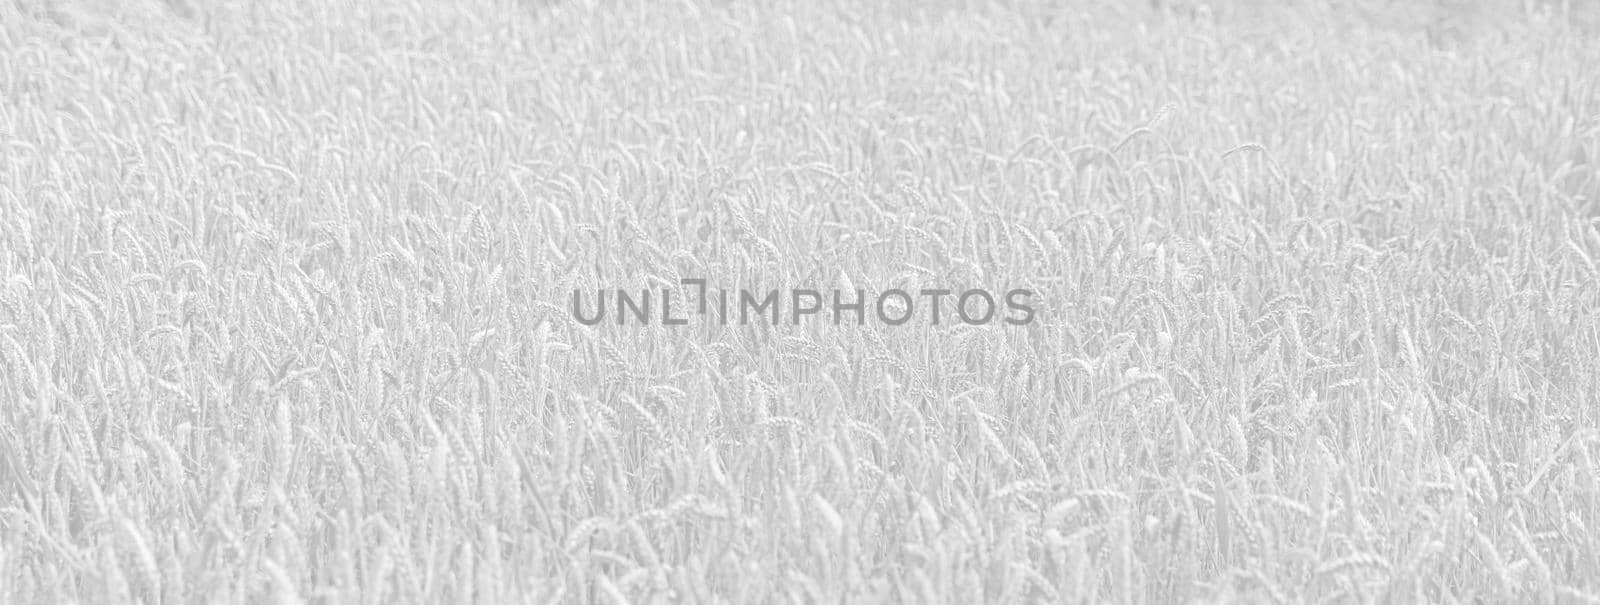 Wheat field. Golden wheat field at sunny day. Beautiful nature landscape. Image in light gray tonality